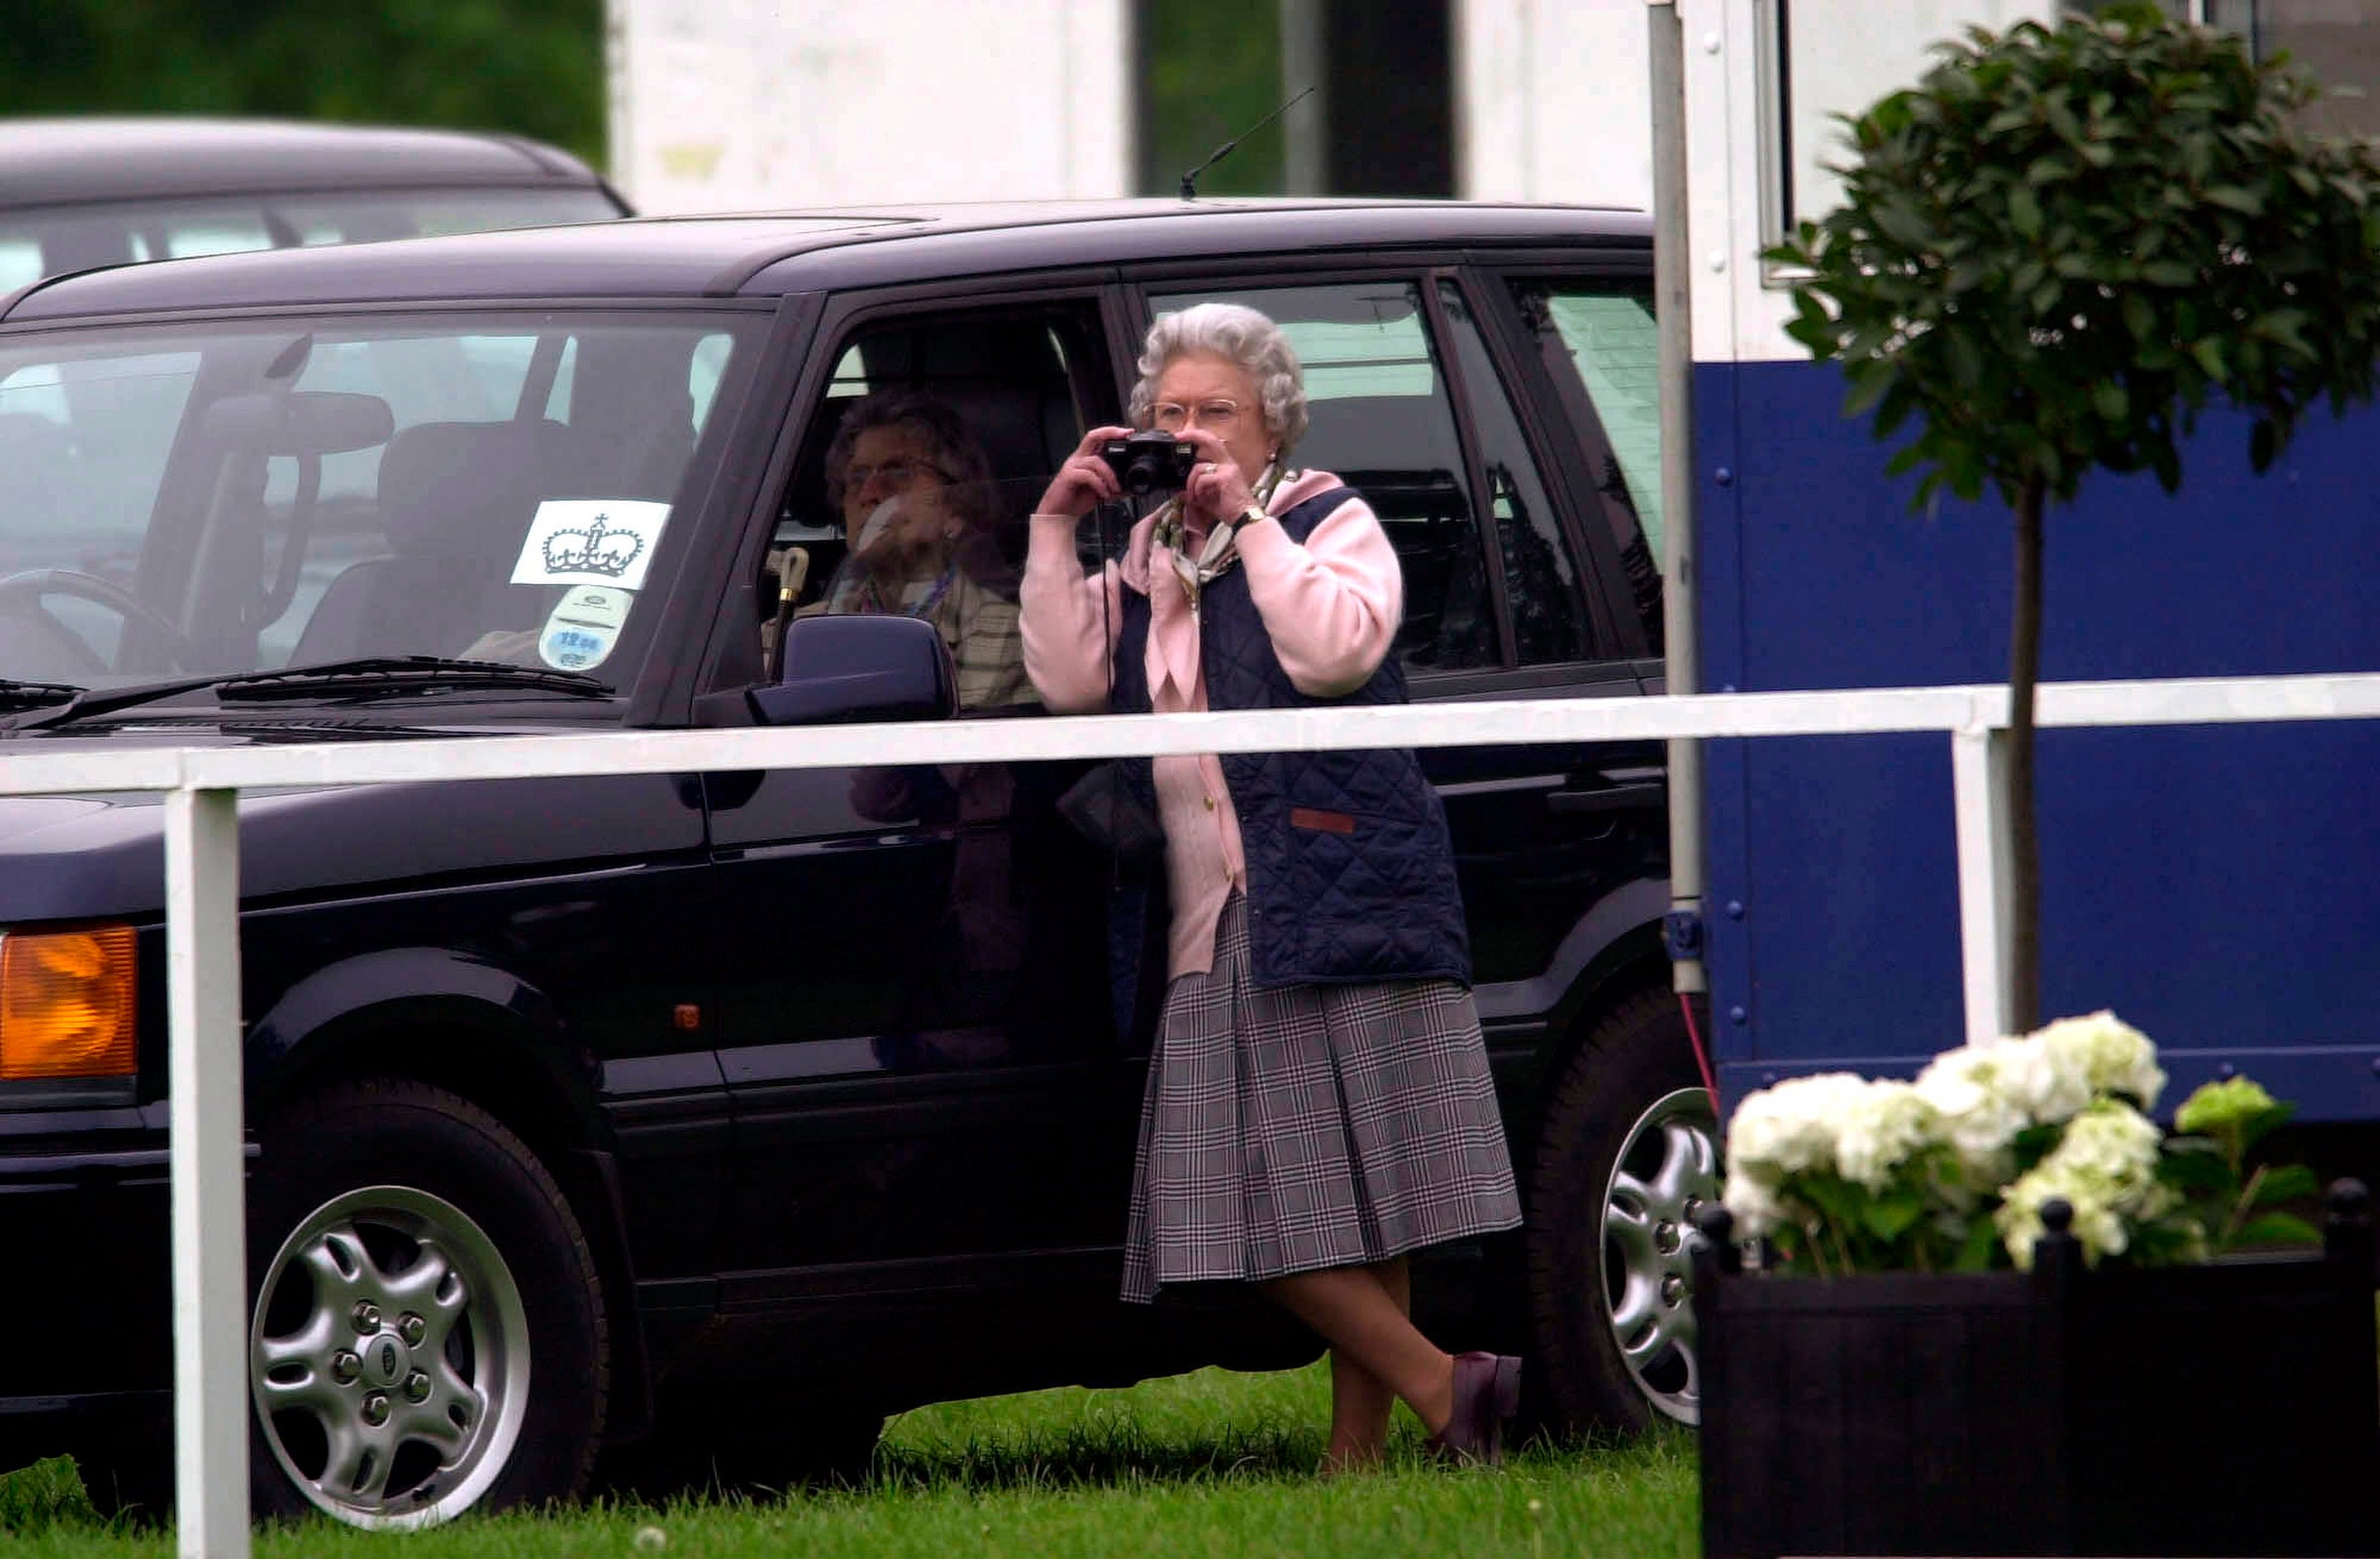 Queen Elizabeth II taking photographs of her unseen husband, Prince Philip, competing at the Royal Windsor Horse Show carriage driving dressage.